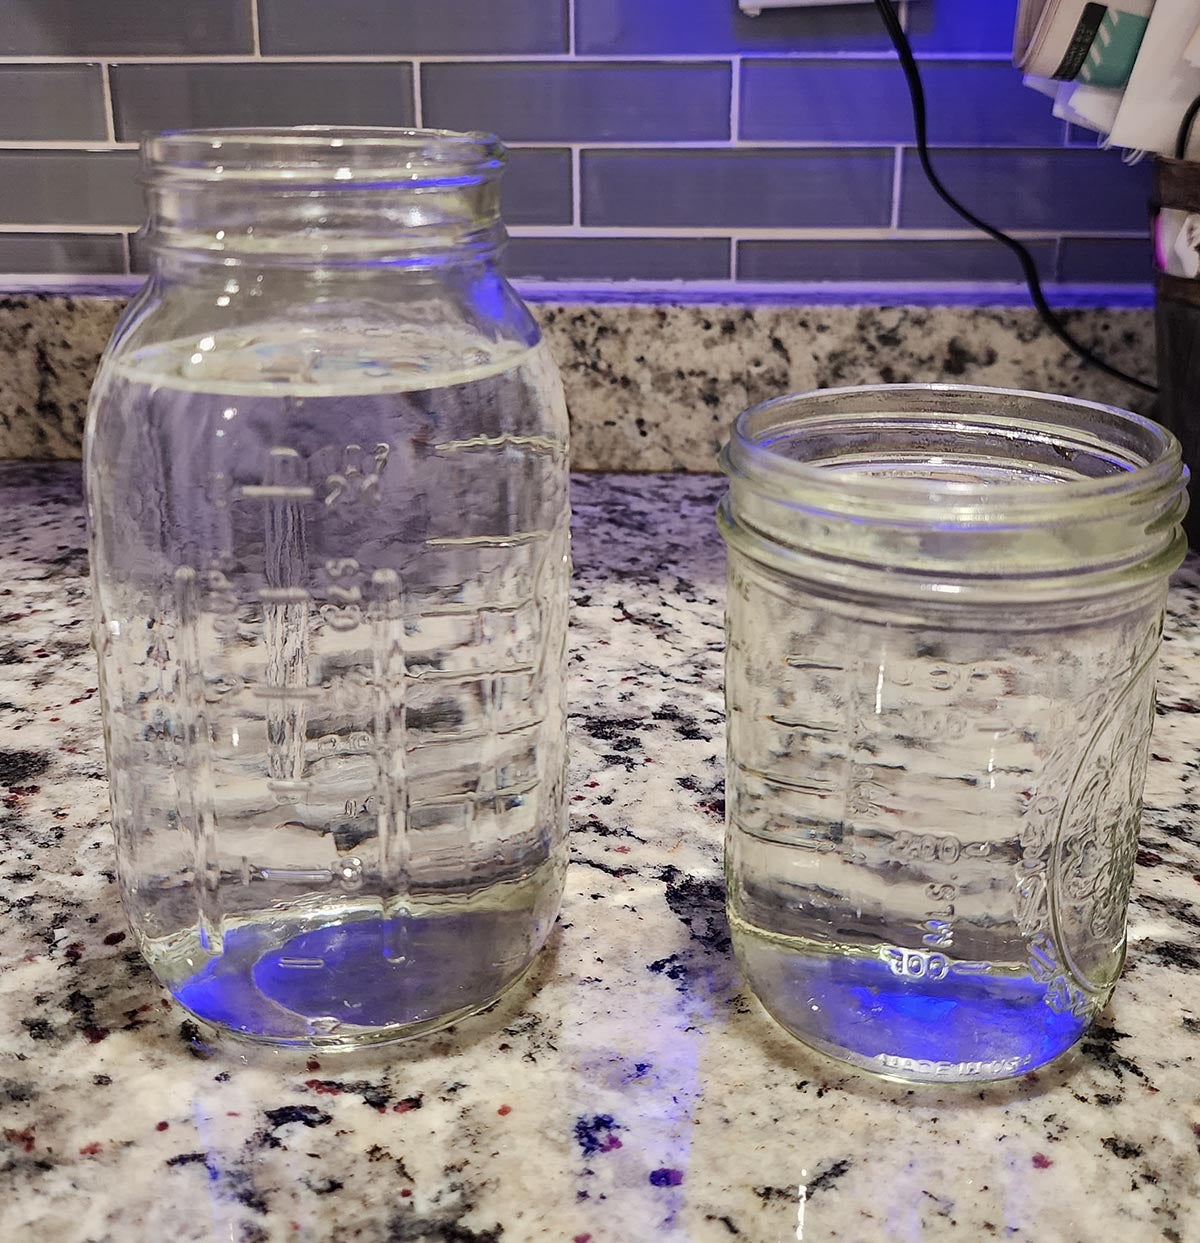 Two full mason jars of water collected using the Hisense wi-fi dehumidifier